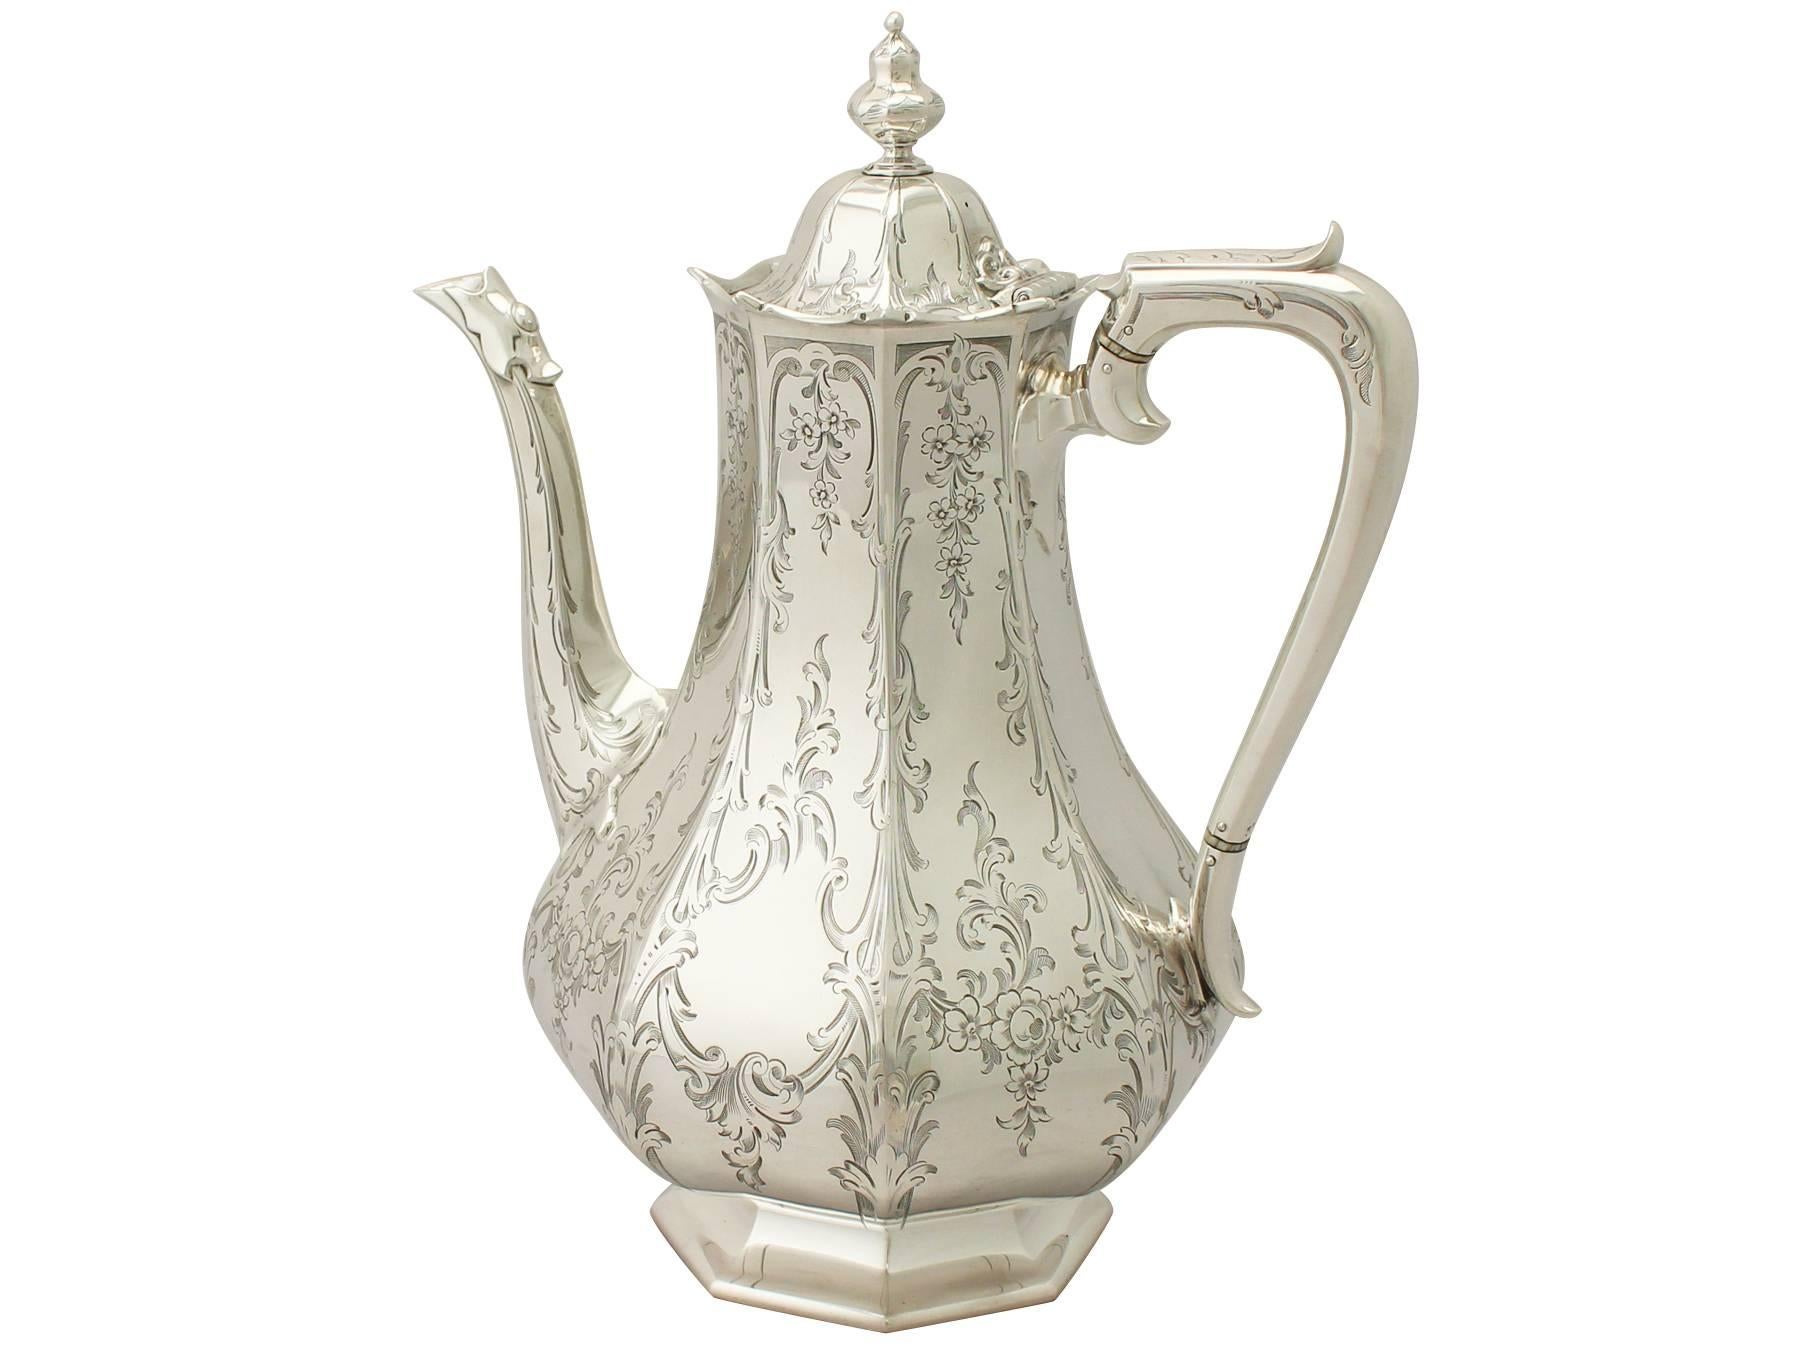 A fine and impressive antique Victorian English sterling silver coffee pot made by Edward & John Barnard; an addition to our diverse silver teaware collection.

This fine antique Victorian sterling silver coffee pot has a panelled baluster shaped